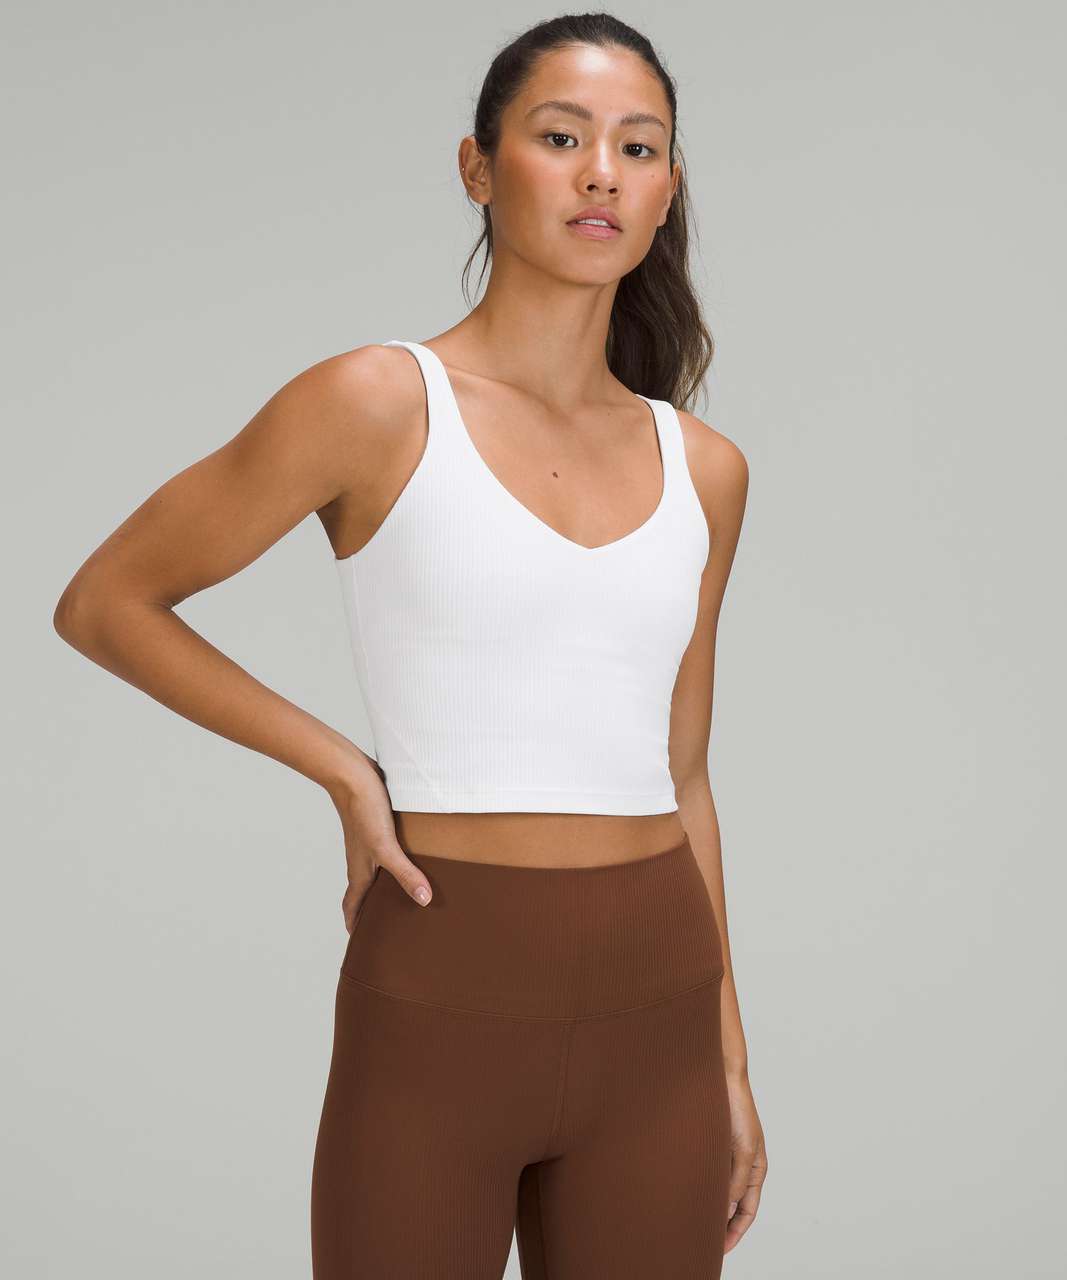 Lululemon Align Tank White Size 2 - $45 (22% Off Retail) - From